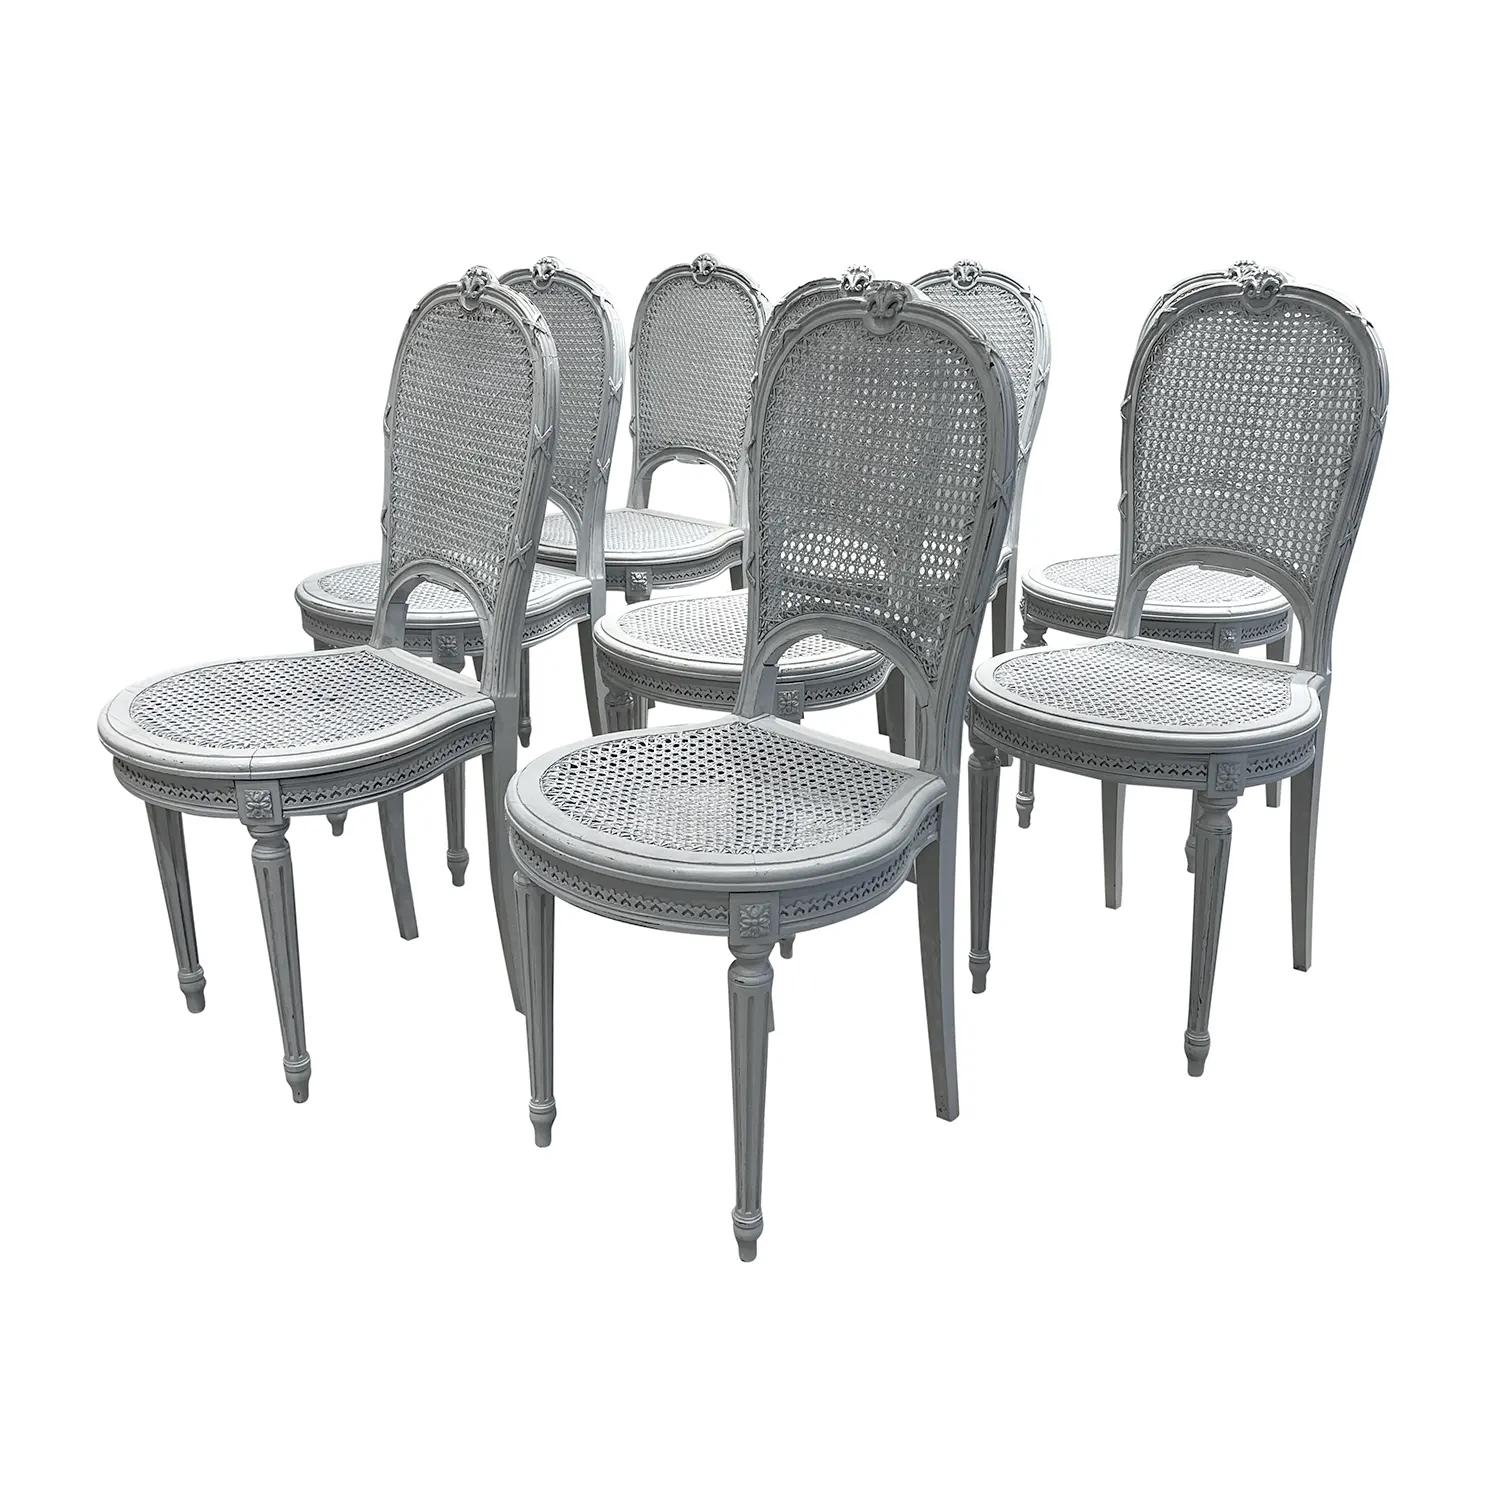 An antique set of eight Louis XVI style dining room chairs made of hand carved pinewood, in good condition. The Scandinavian side chairs in a chalky grey finish have a rounded cane backrests, cane seat and tapered legs. Wear consistent with age and